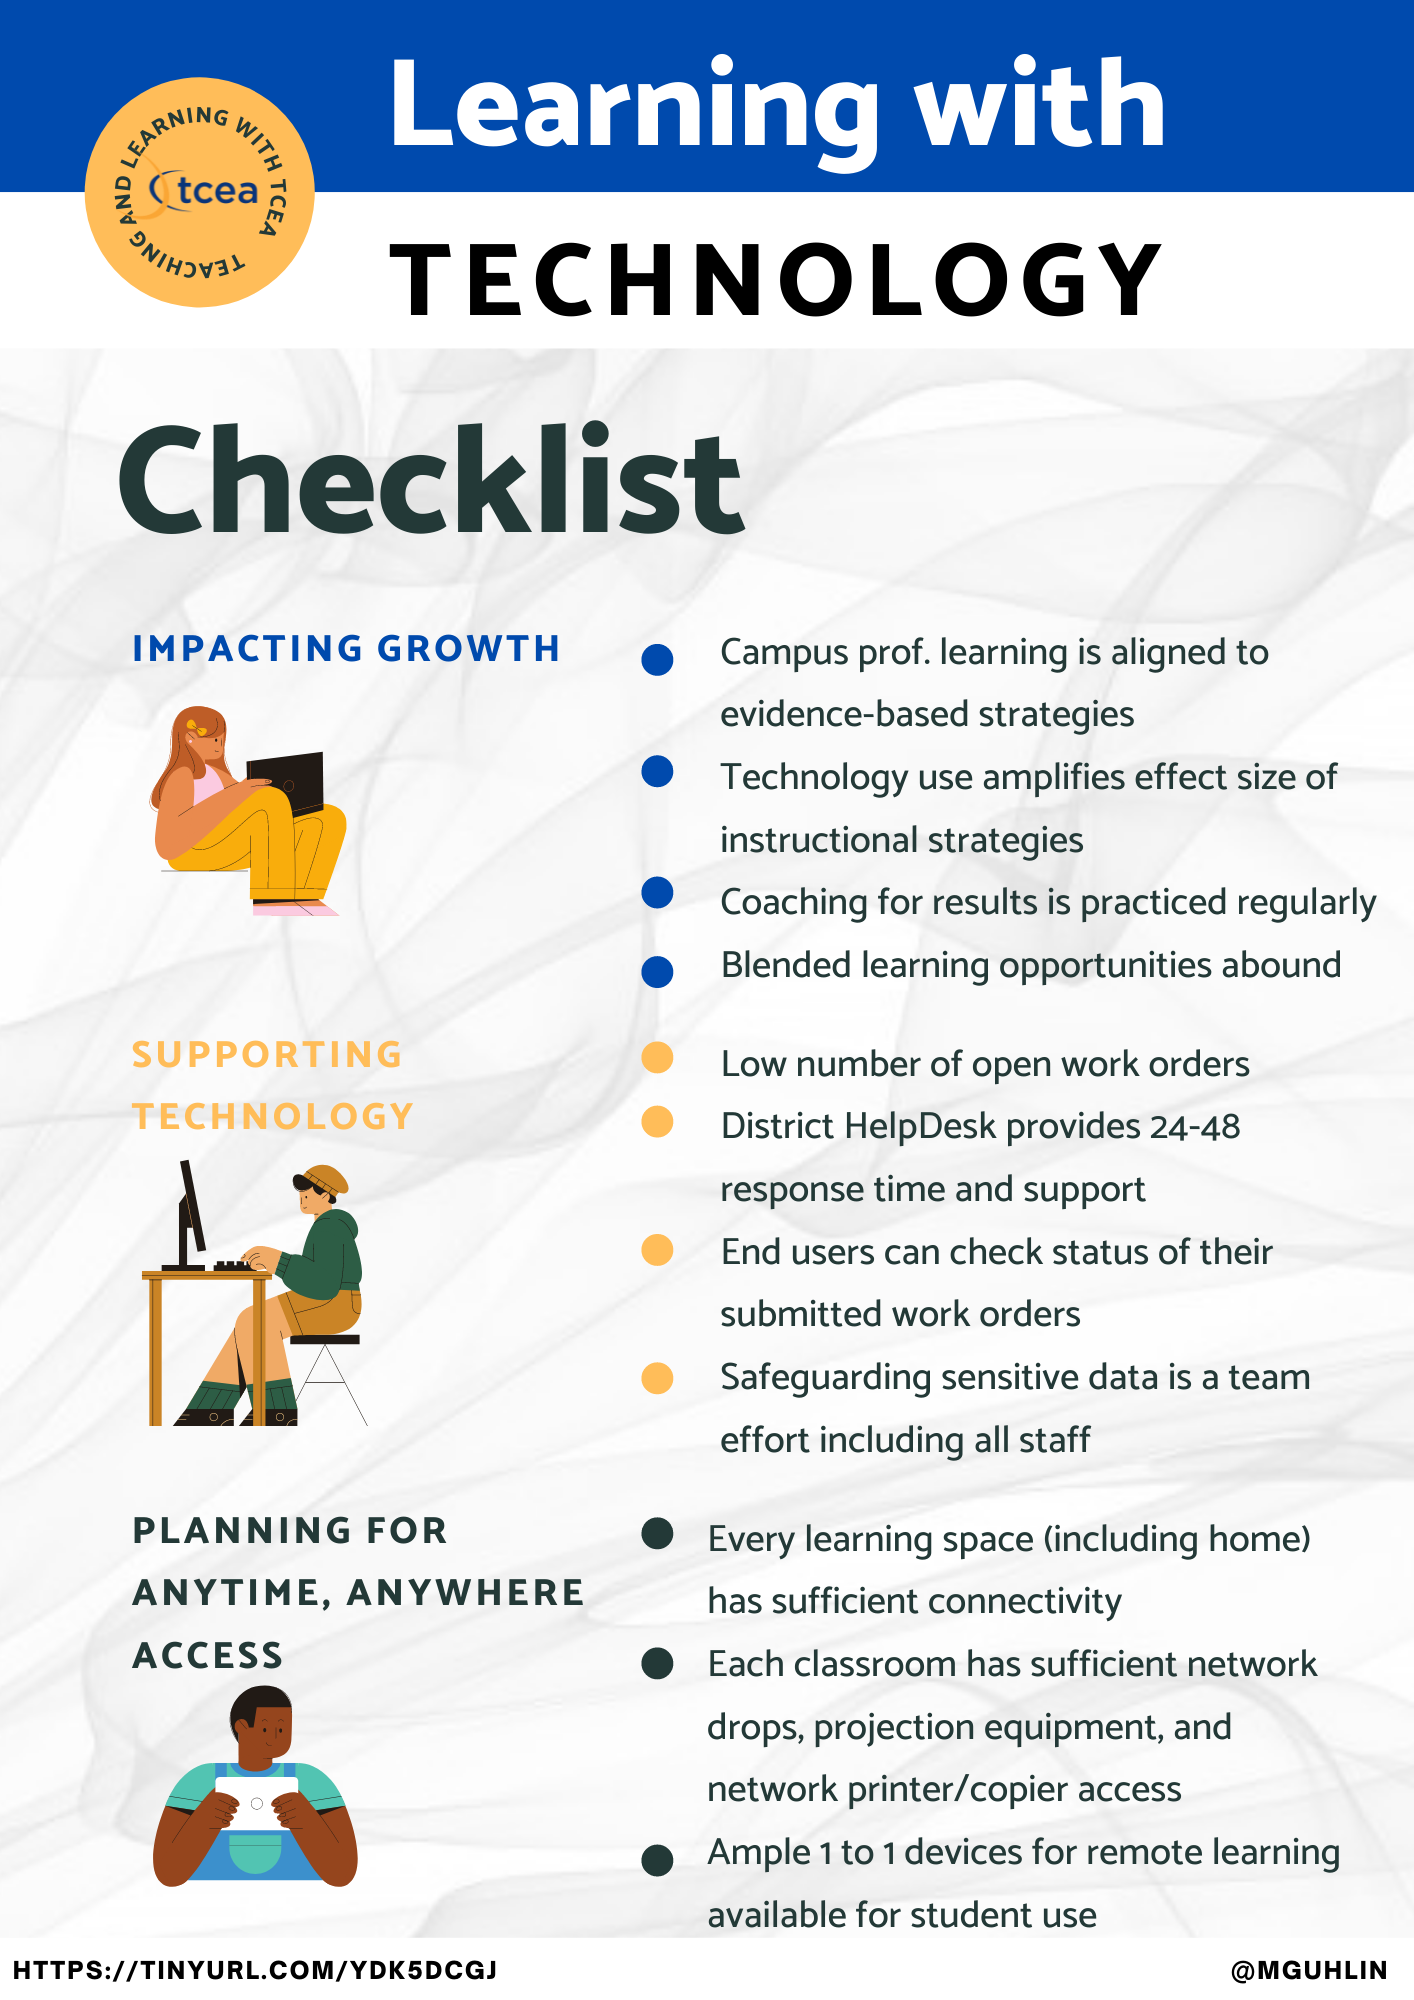 https://blog.tcea.org/wp-content/uploads/2021/05/Checklist_Learning_with_Tech-1.png